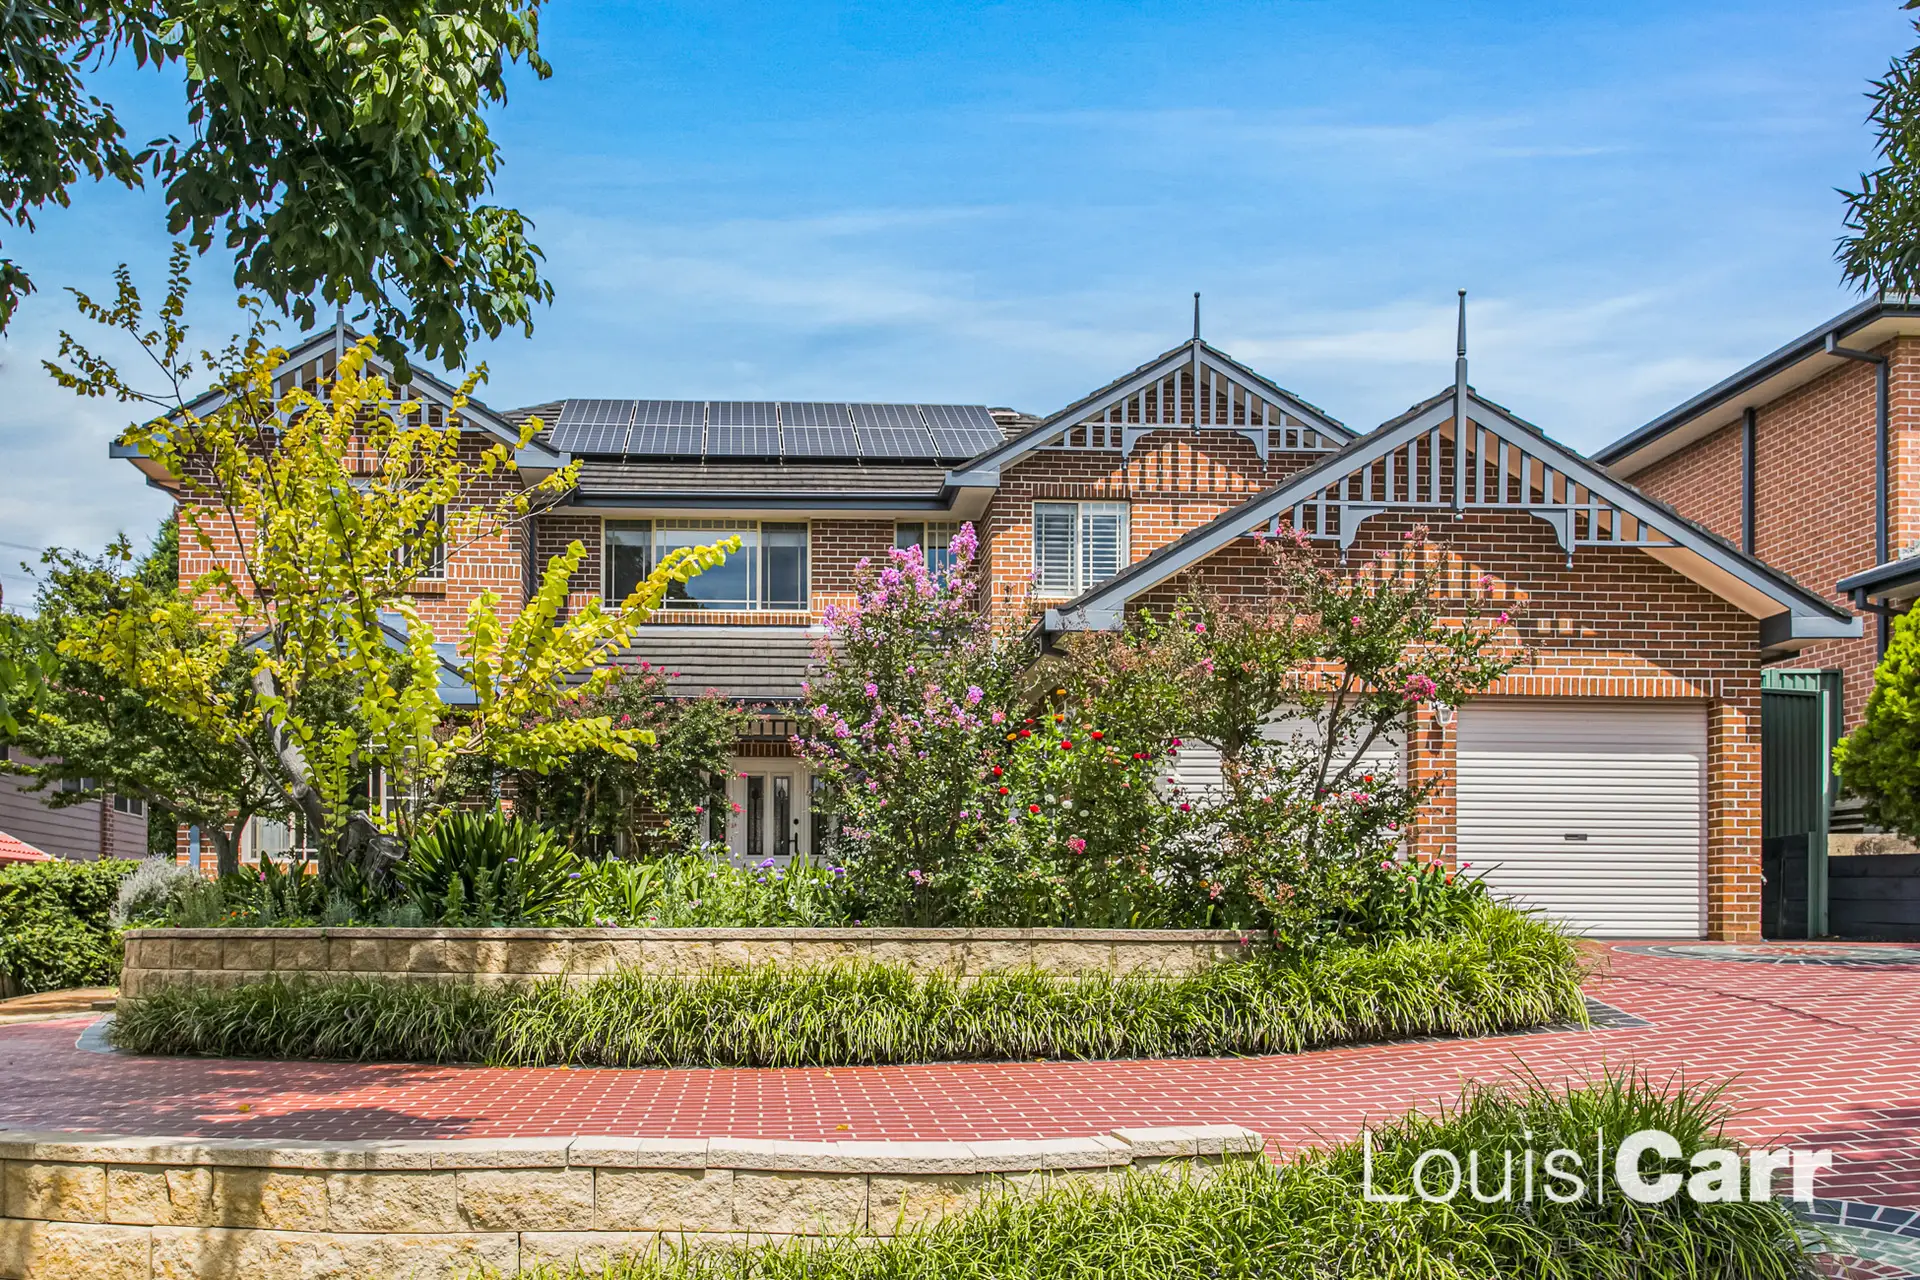 Photo #1: 9 Teddick Place, Cherrybrook - Sold by Louis Carr Real Estate